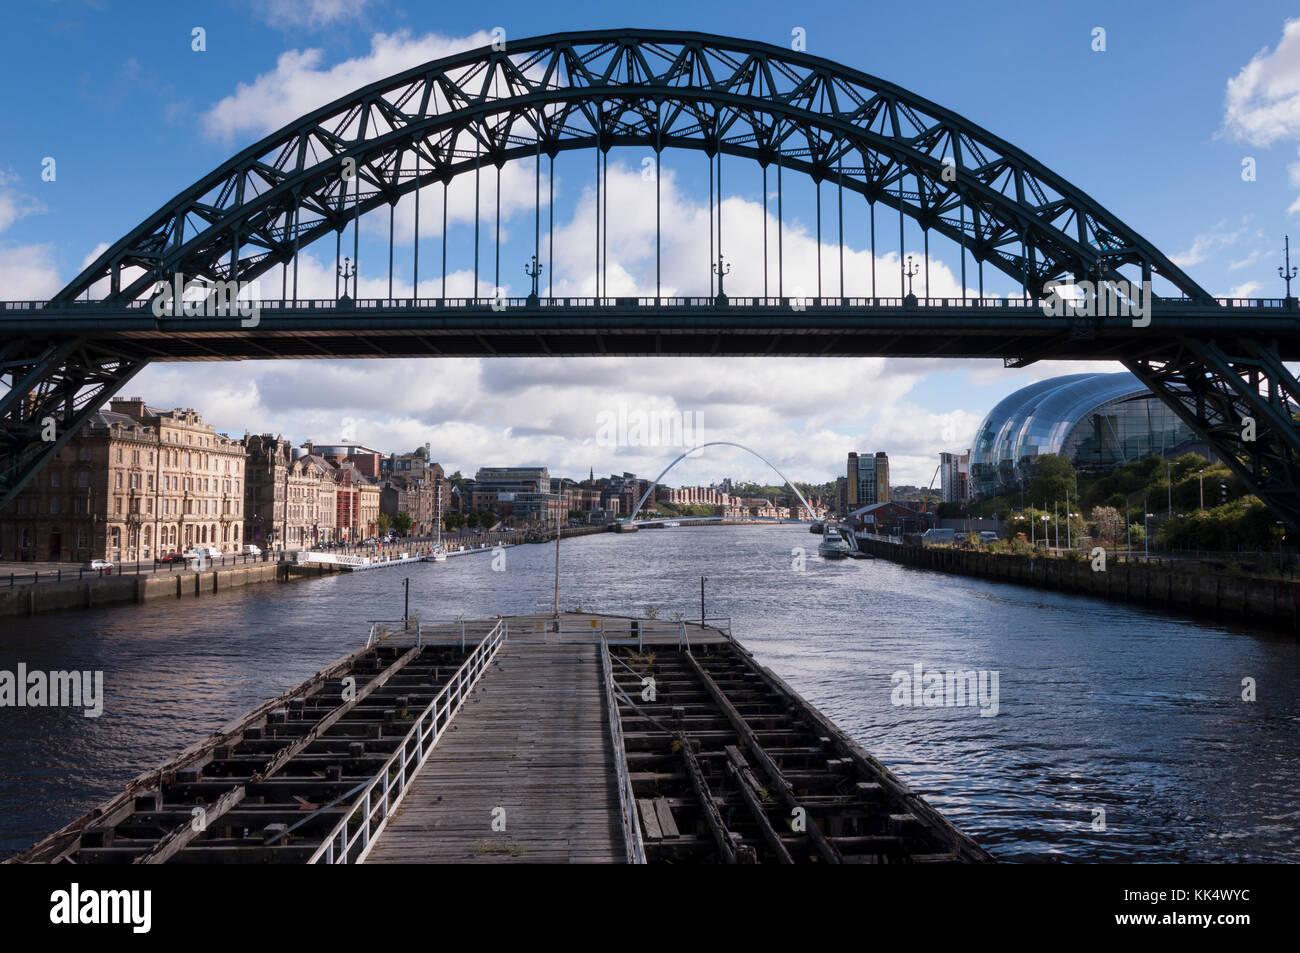 Looking from the swing bridge to the tyne bridge on the  River Tyne in North East England, linking Newcastle upon Tyne and Gateshead. Stock Photo